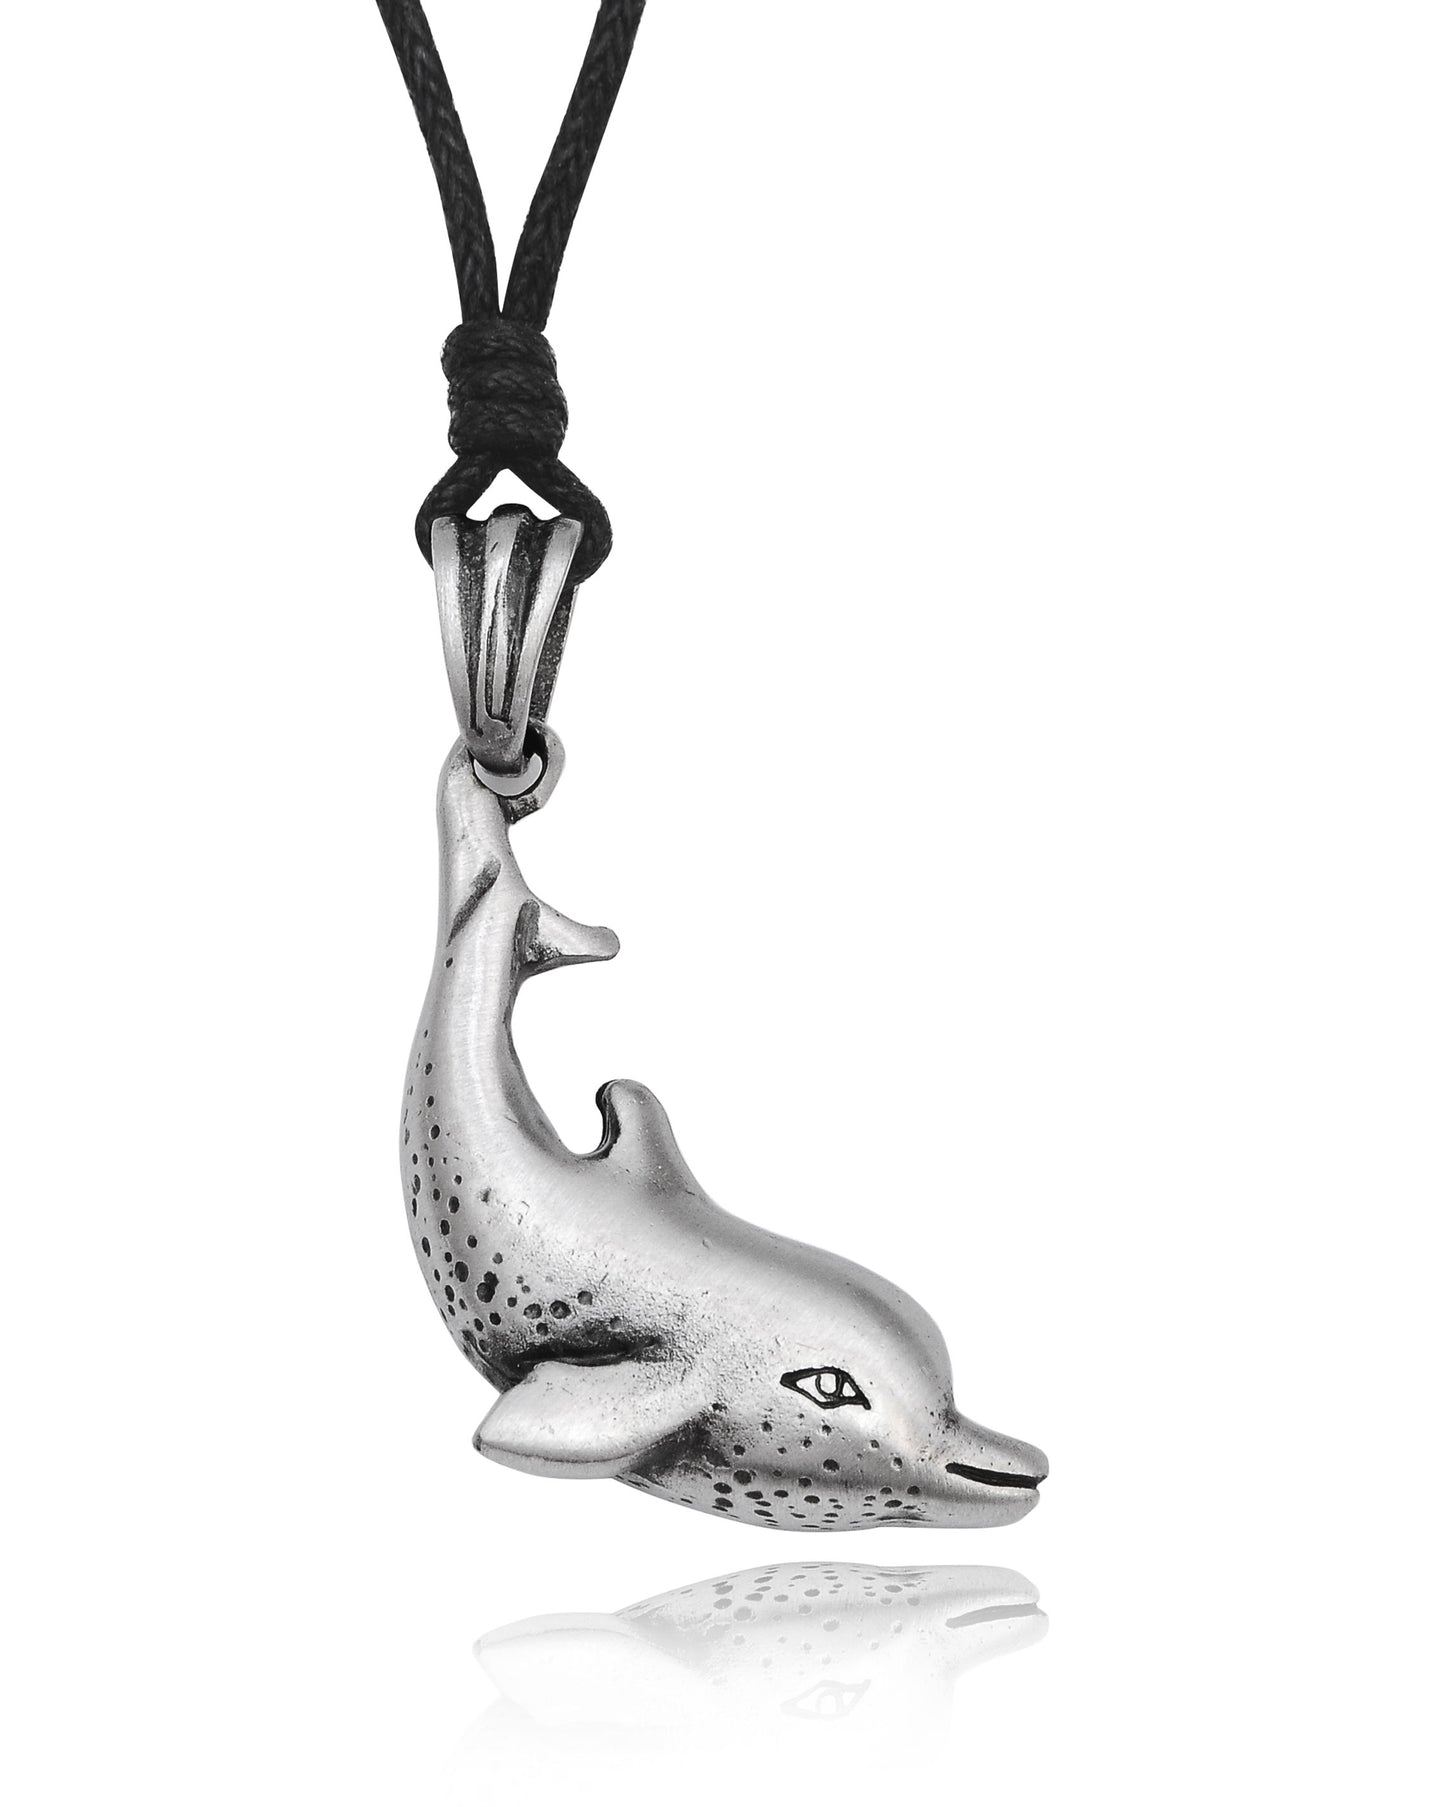 Adorable Dolphin Silver Pewter Charm Necklace Pendant Jewelry